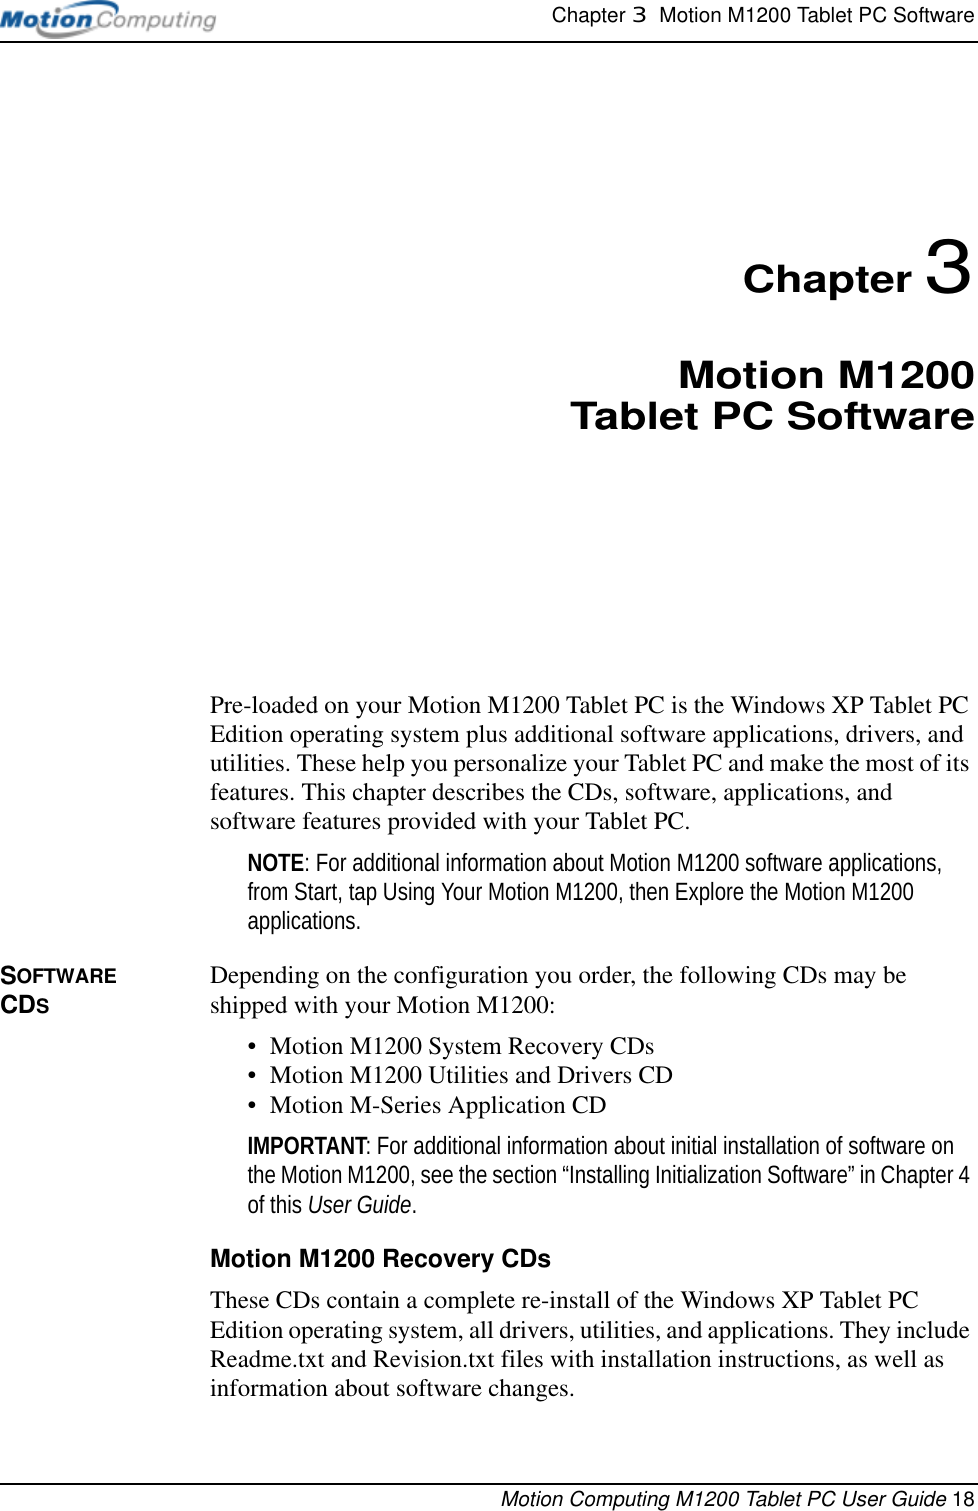 Chapter 3  Motion M1200 Tablet PC SoftwareMotion Computing M1200 Tablet PC User Guide 18Chapter 3Motion M1200Tablet PC SoftwarePre-loaded on your Motion M1200 Tablet PC is the Windows XP Tablet PC Edition operating system plus additional software applications, drivers, and utilities. These help you personalize your Tablet PC and make the most of its features. This chapter describes the CDs, software, applications, and software features provided with your Tablet PC.NOTE: For additional information about Motion M1200 software applications, from Start, tap Using Your Motion M1200, then Explore the Motion M1200 applications. SOFTWARE CDSDepending on the configuration you order, the following CDs may be shipped with your Motion M1200:• Motion M1200 System Recovery CDs • Motion M1200 Utilities and Drivers CD• Motion M-Series Application CDIMPORTANT: For additional information about initial installation of software on the Motion M1200, see the section “Installing Initialization Software” in Chapter 4 of this User Guide. Motion M1200 Recovery CDsThese CDs contain a complete re-install of the Windows XP Tablet PC Edition operating system, all drivers, utilities, and applications. They include Readme.txt and Revision.txt files with installation instructions, as well as information about software changes.